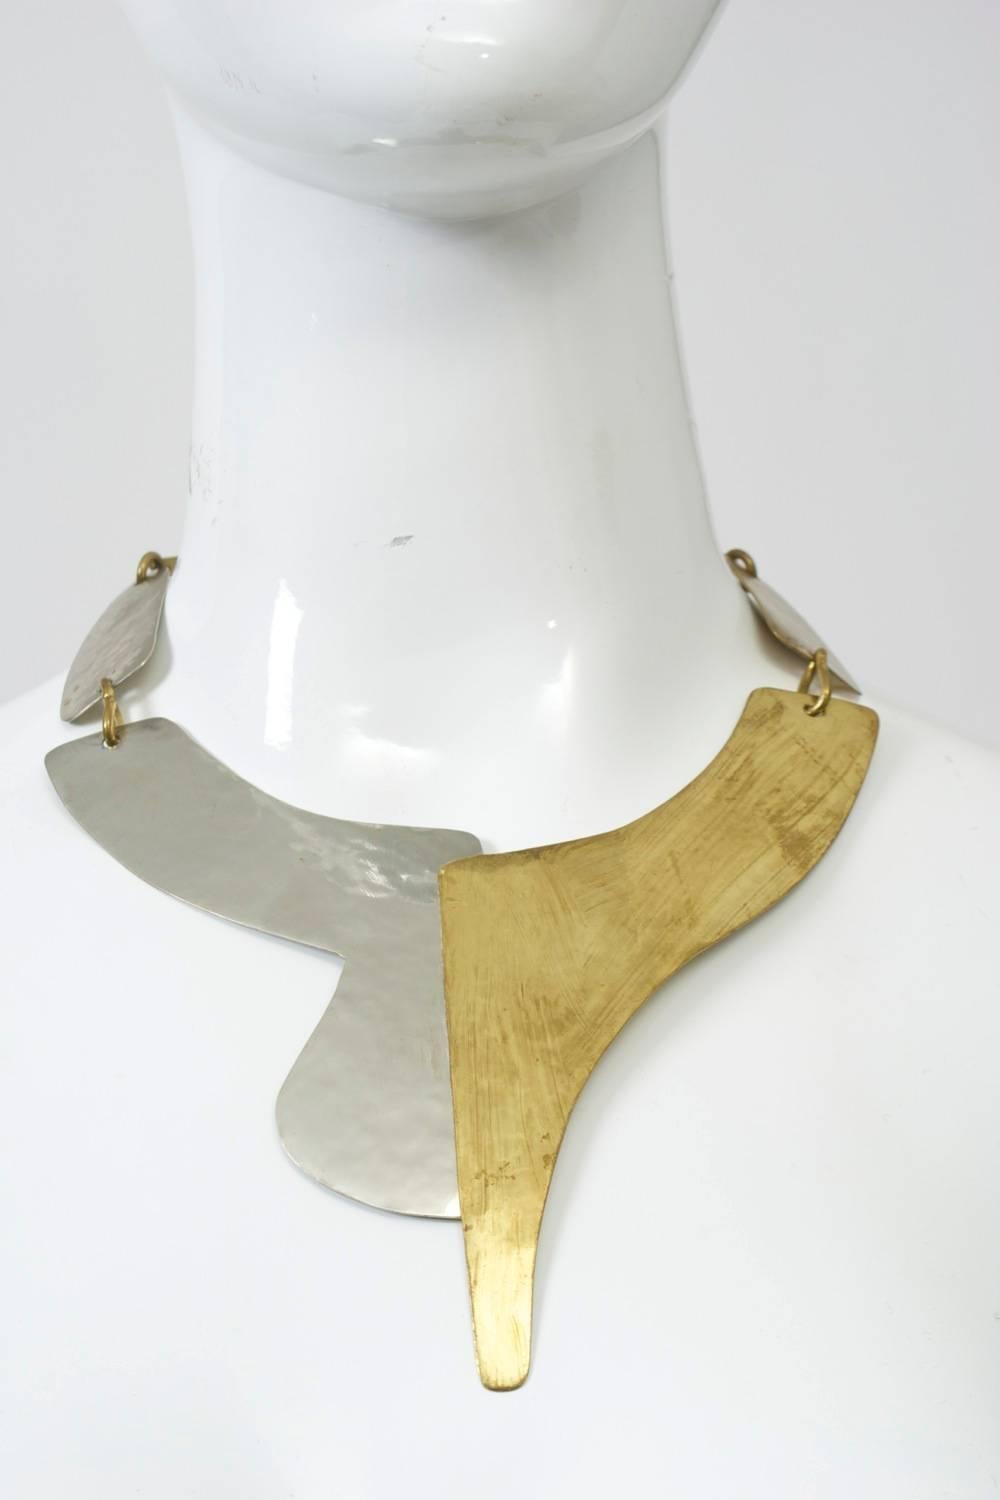 Modernist neck piece in mixed metal, composed of two overlapping, curved and asymmetrical components in front. Artist made with hand forged links and hook in back.